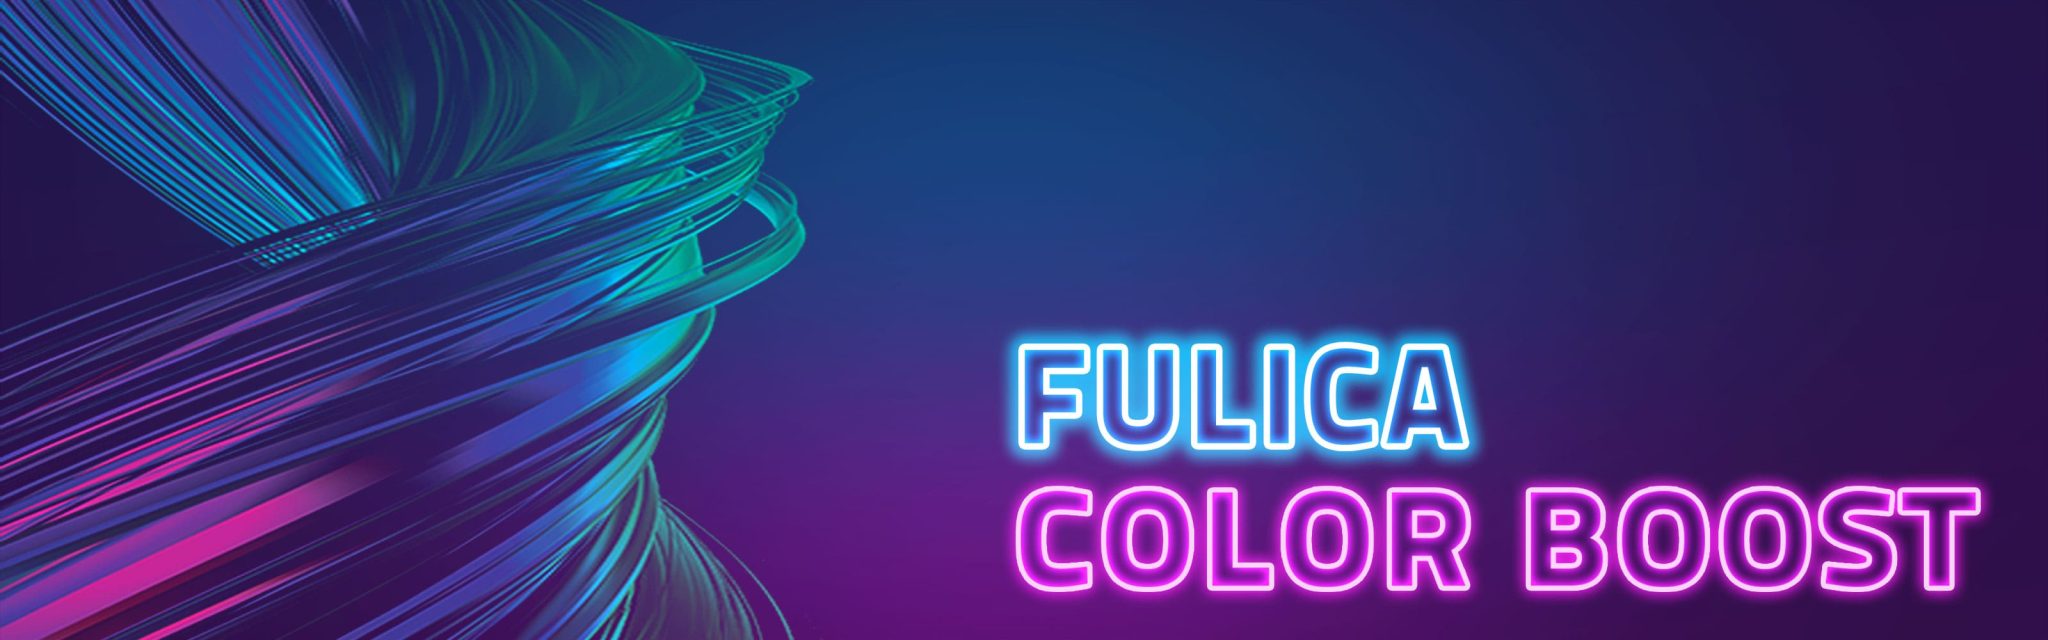 background-fulica-colorboost-2048x640